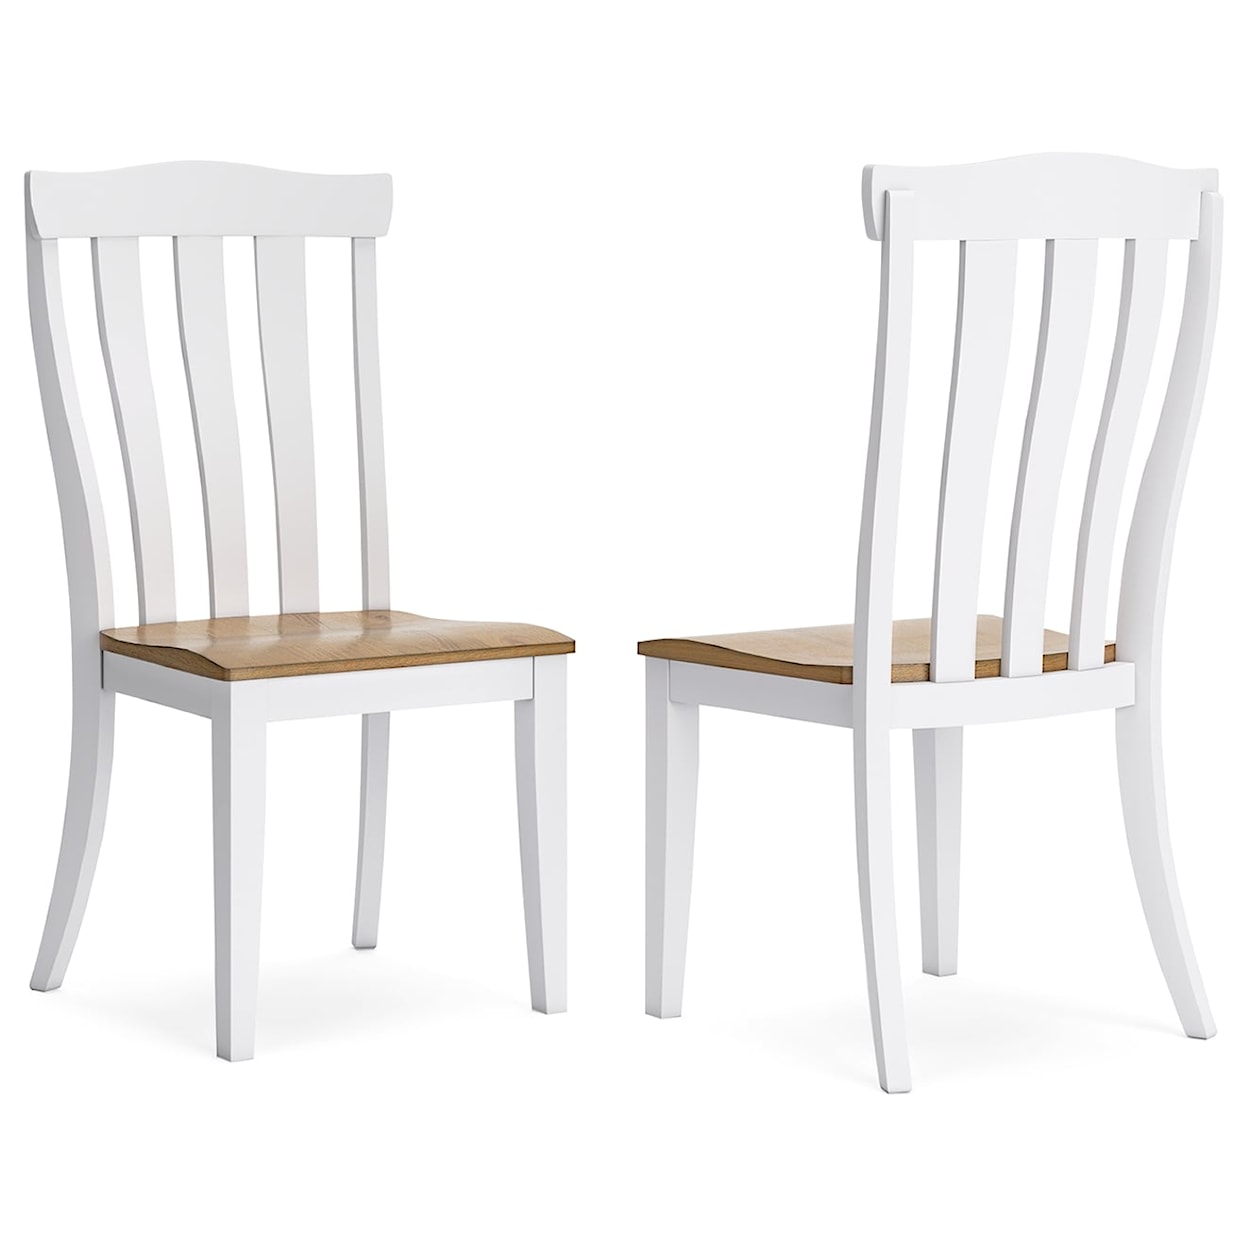 Signature Design Ashbryn Dining Room Side Chair